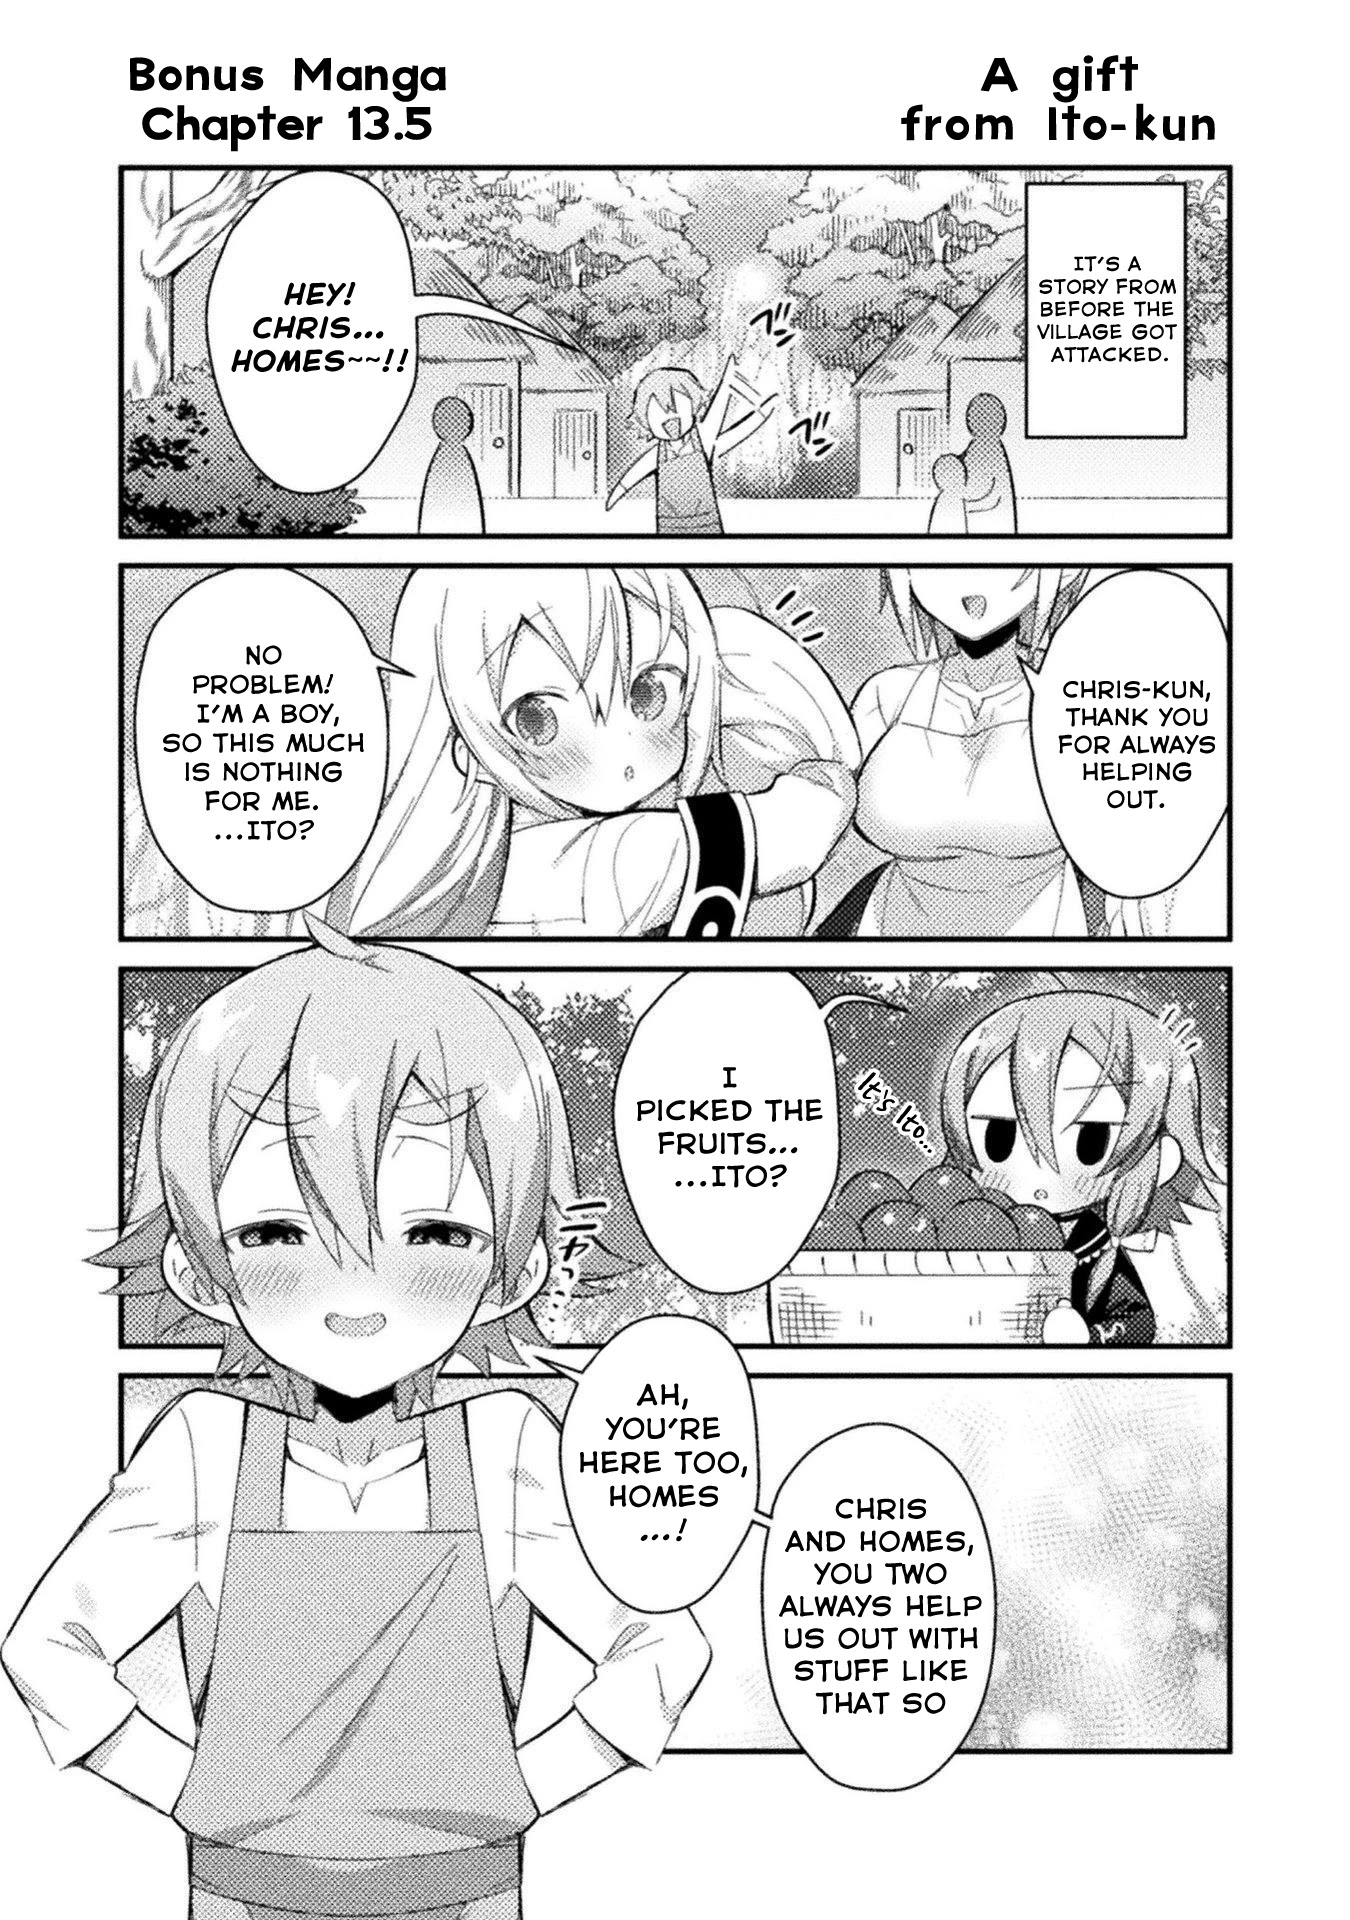 After Reincarnation, My Party Was Full Of Traps, But I'm Not A Shotacon! - 13.5 page 5